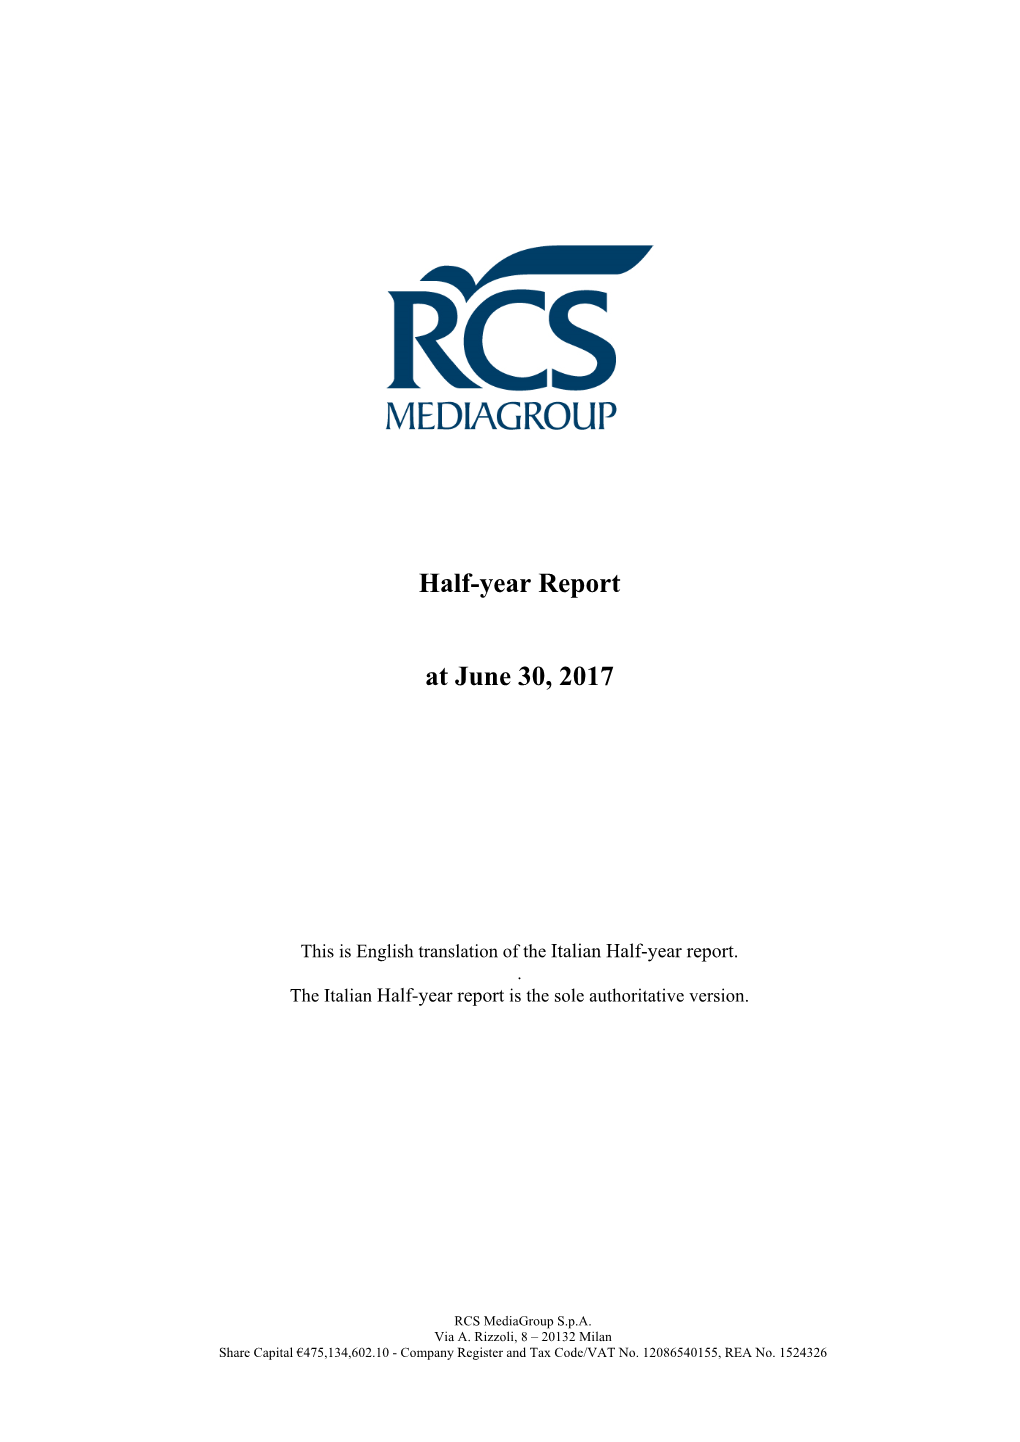 Half-Year Report at June 30, 2017 Was Approved by the Board of Directors of RCS Mediagroup S.P.A